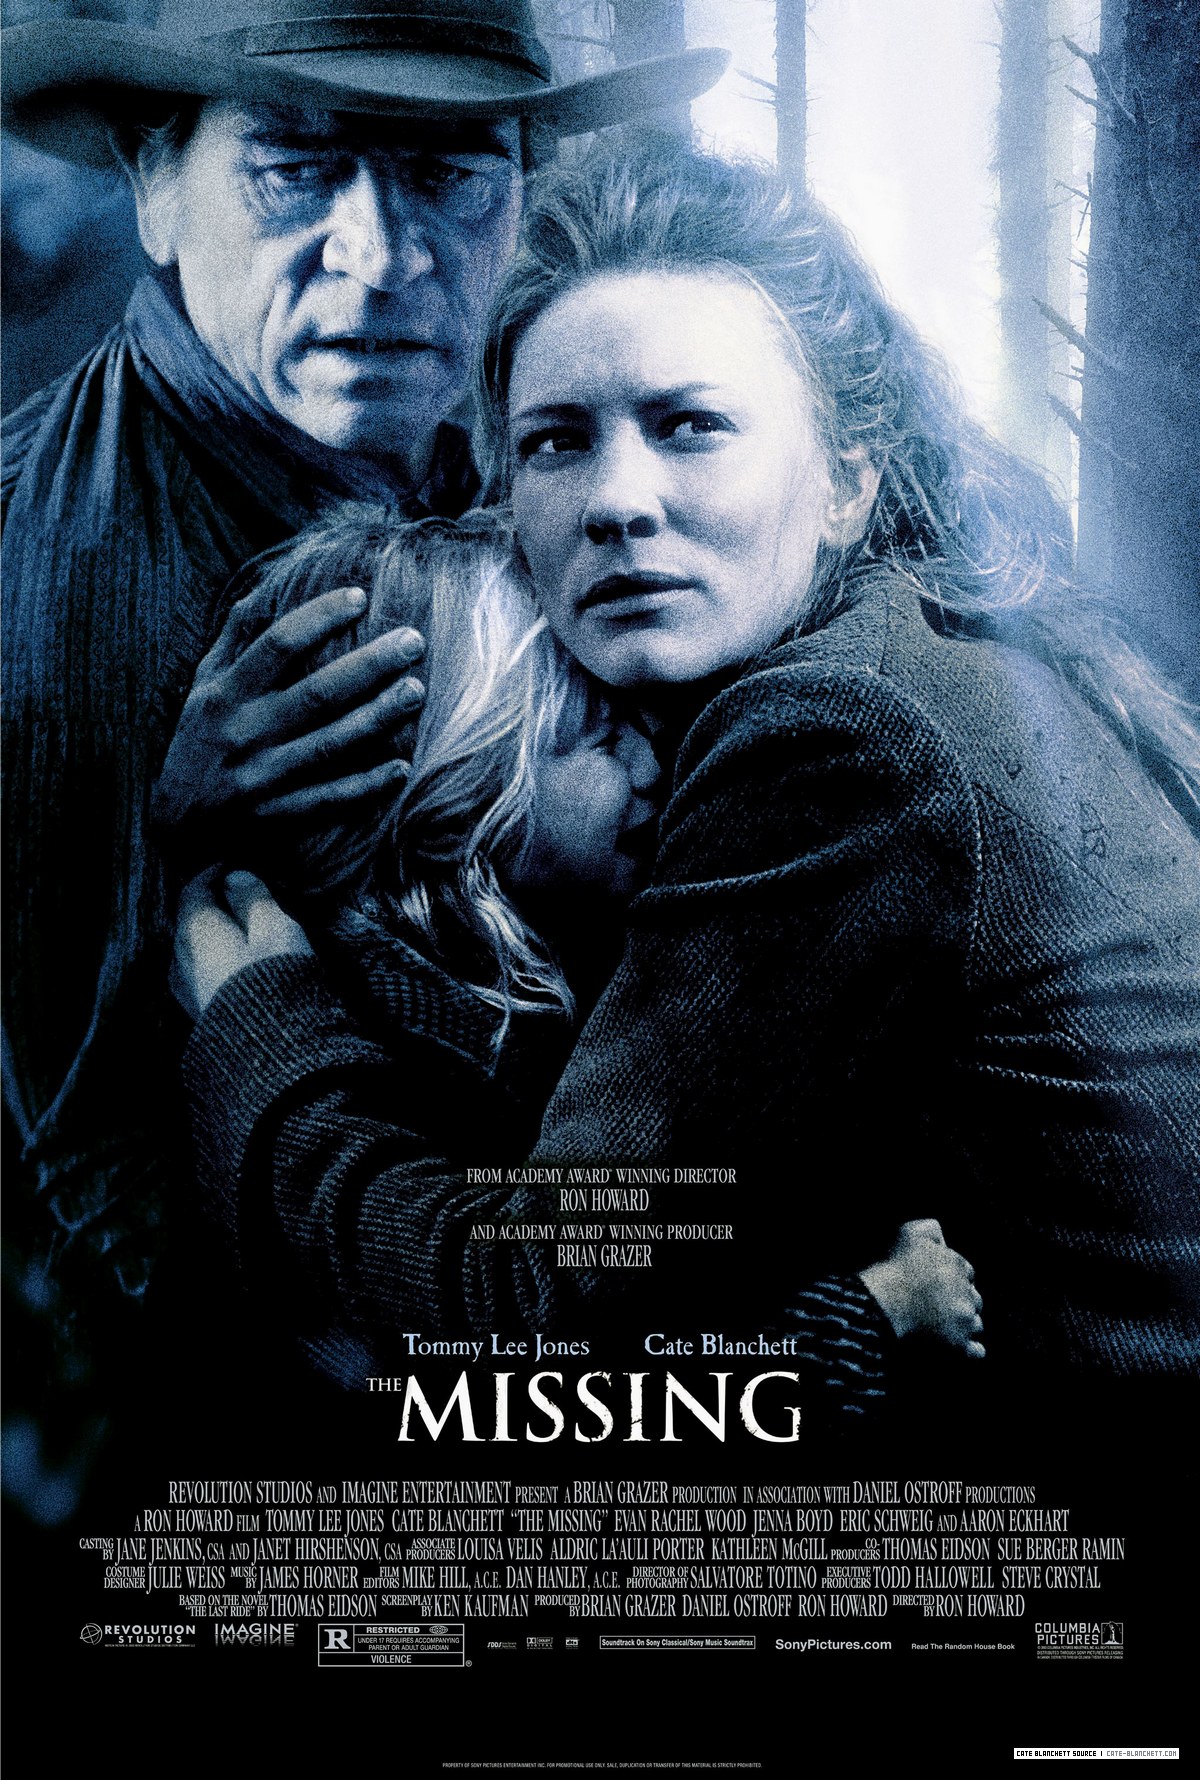 TheMissing-Posters_002.jpg